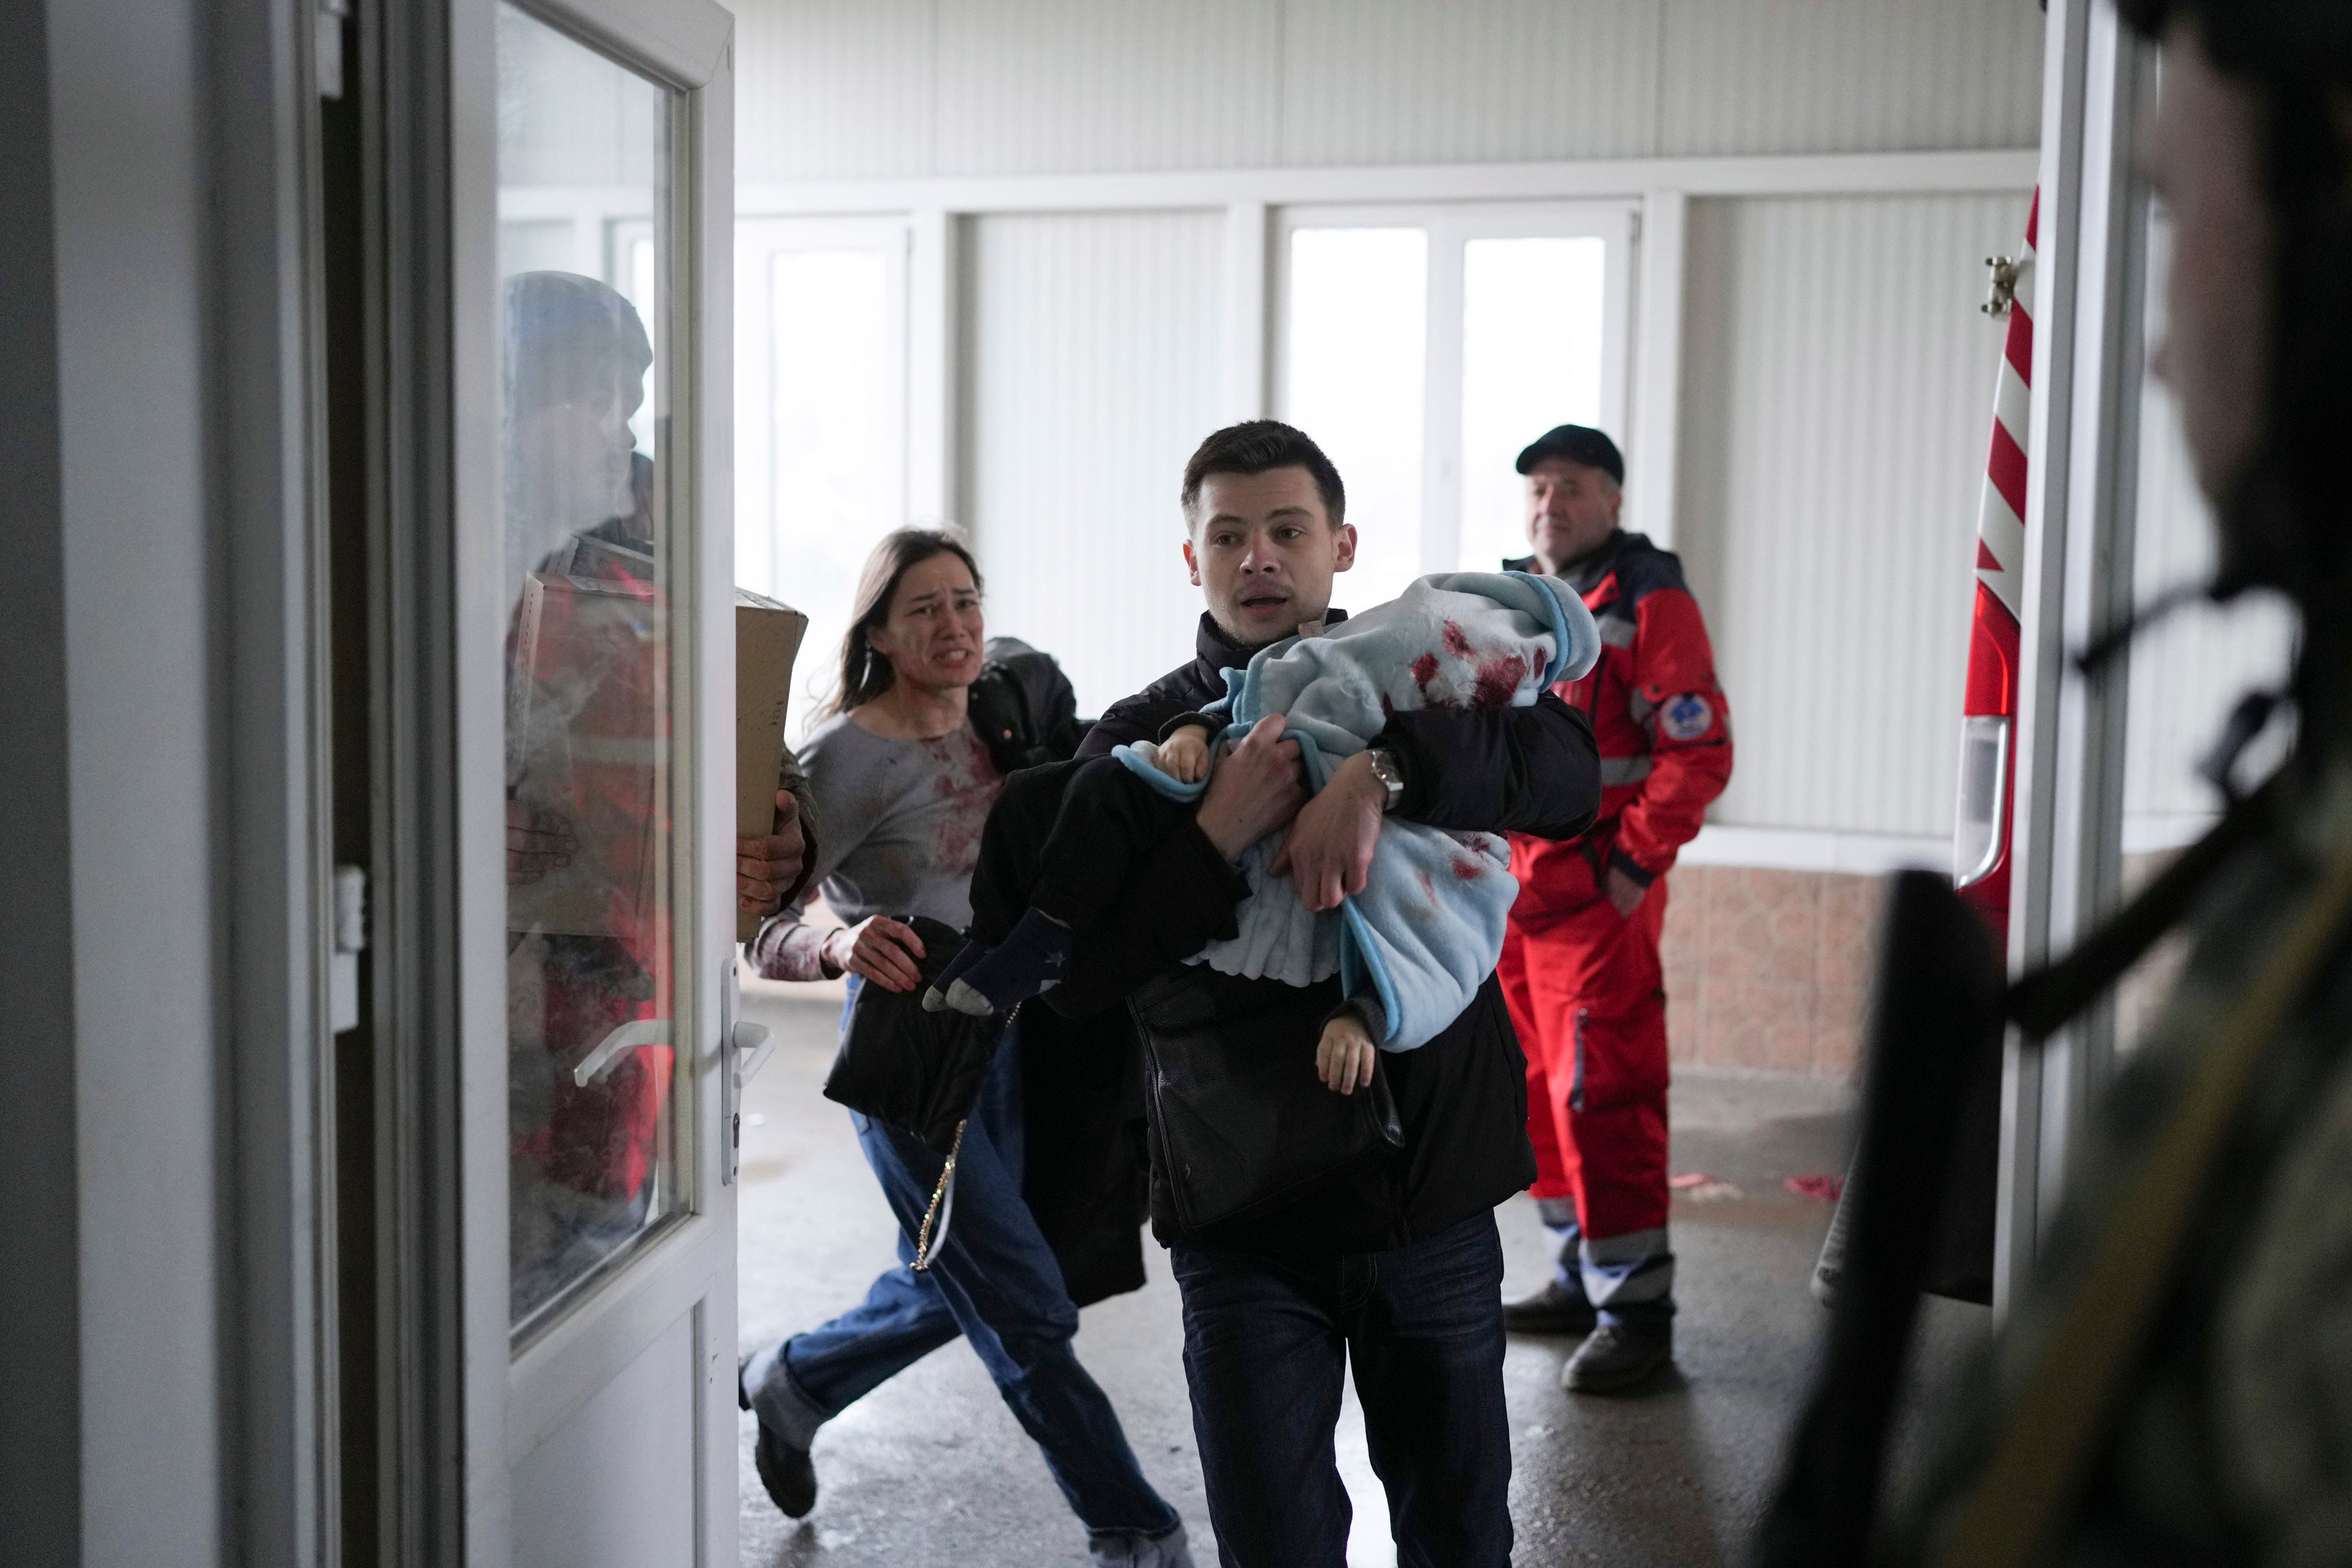 Marina Yatsko, left, runs behind her boyfriend Fedor carrying her 18 month-old son Kirill who was killed in shelling, as they arrive at a hospital in Mariupol